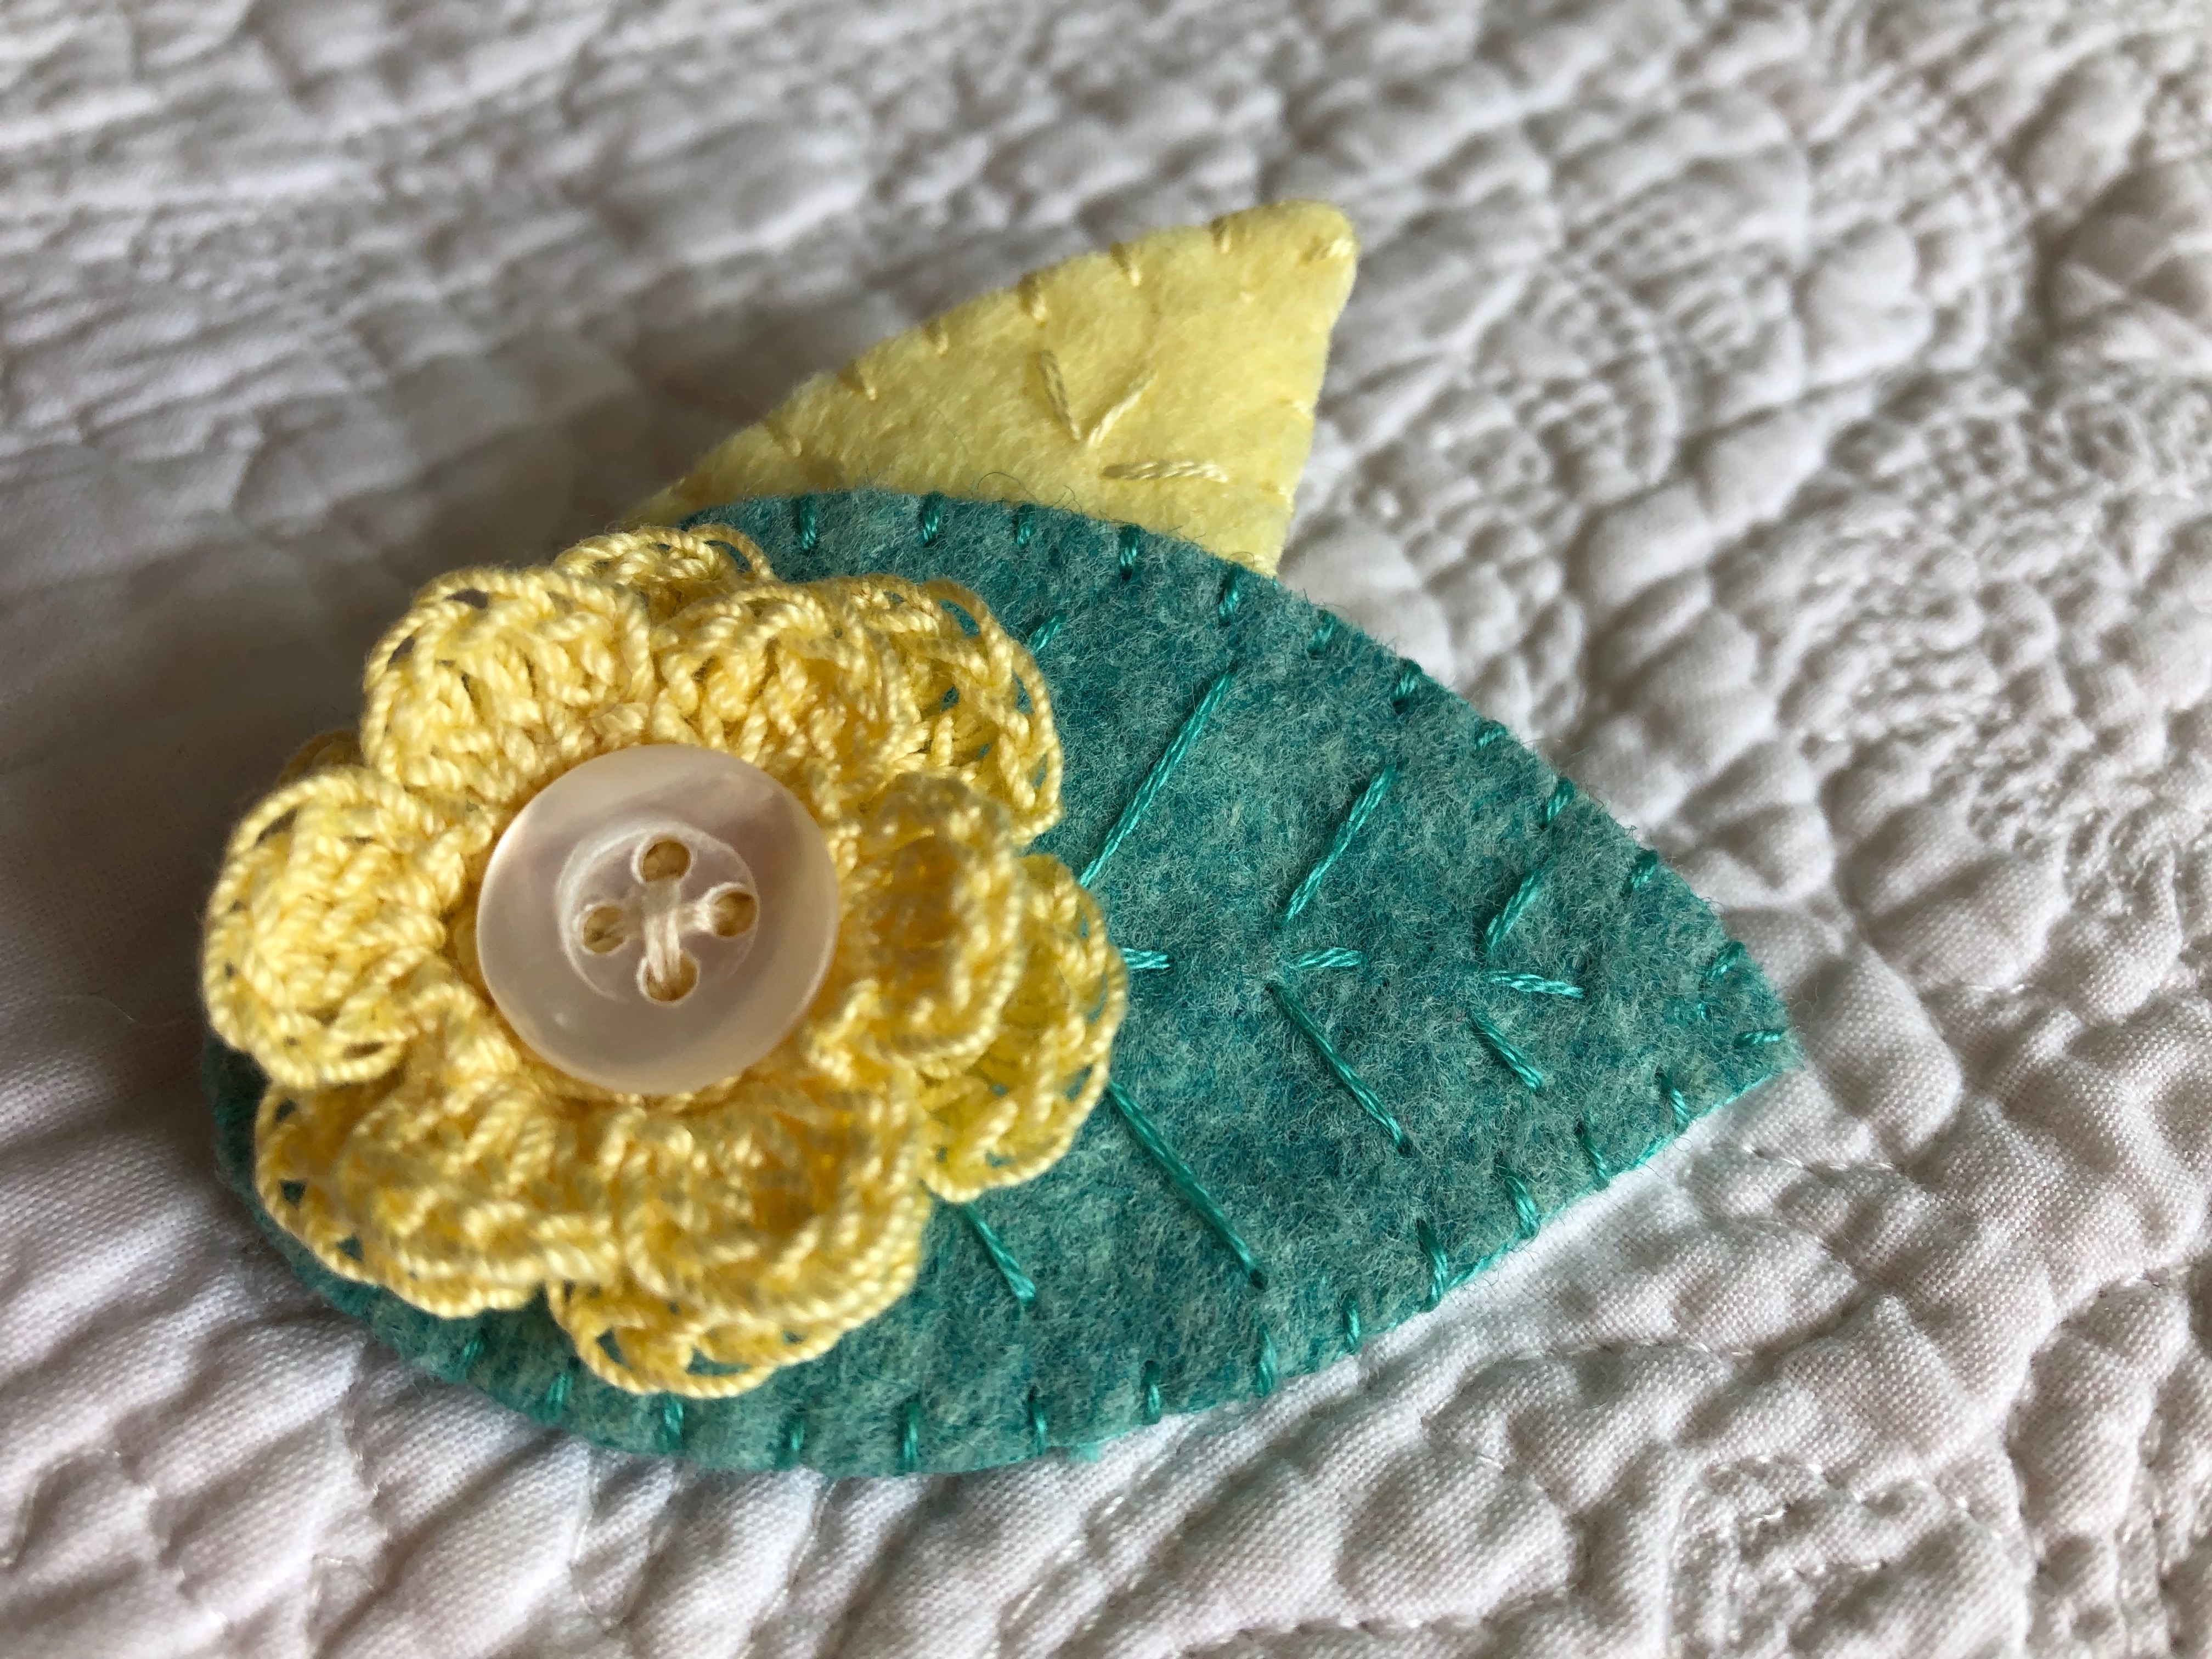 A handmade felt and crocheted brooch with hand stitched and button detailing. Pale yellow flower with pale yellow and green hand detailed felt leaves.